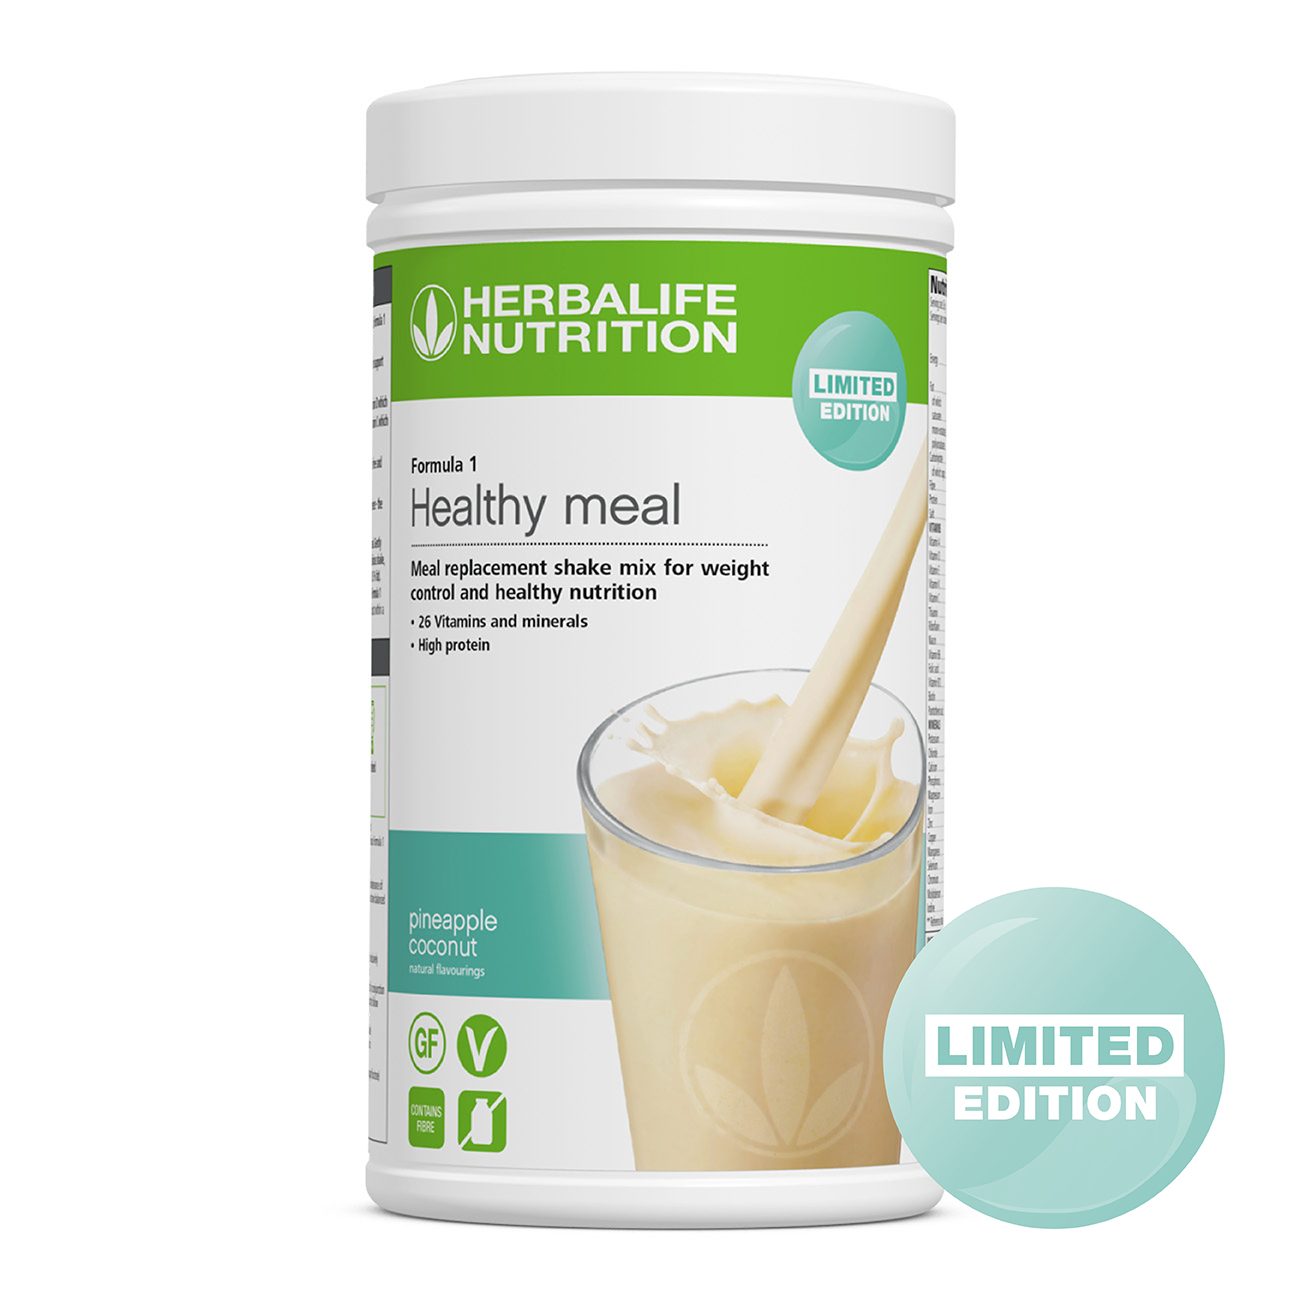 Bring some sunshine vibes to your morning shake with this limited edition F1 Pineapple Coconut Flavoured. It is a healthy meal replacement shake, high in protein and balanced with vitamins and minerals plus fats.